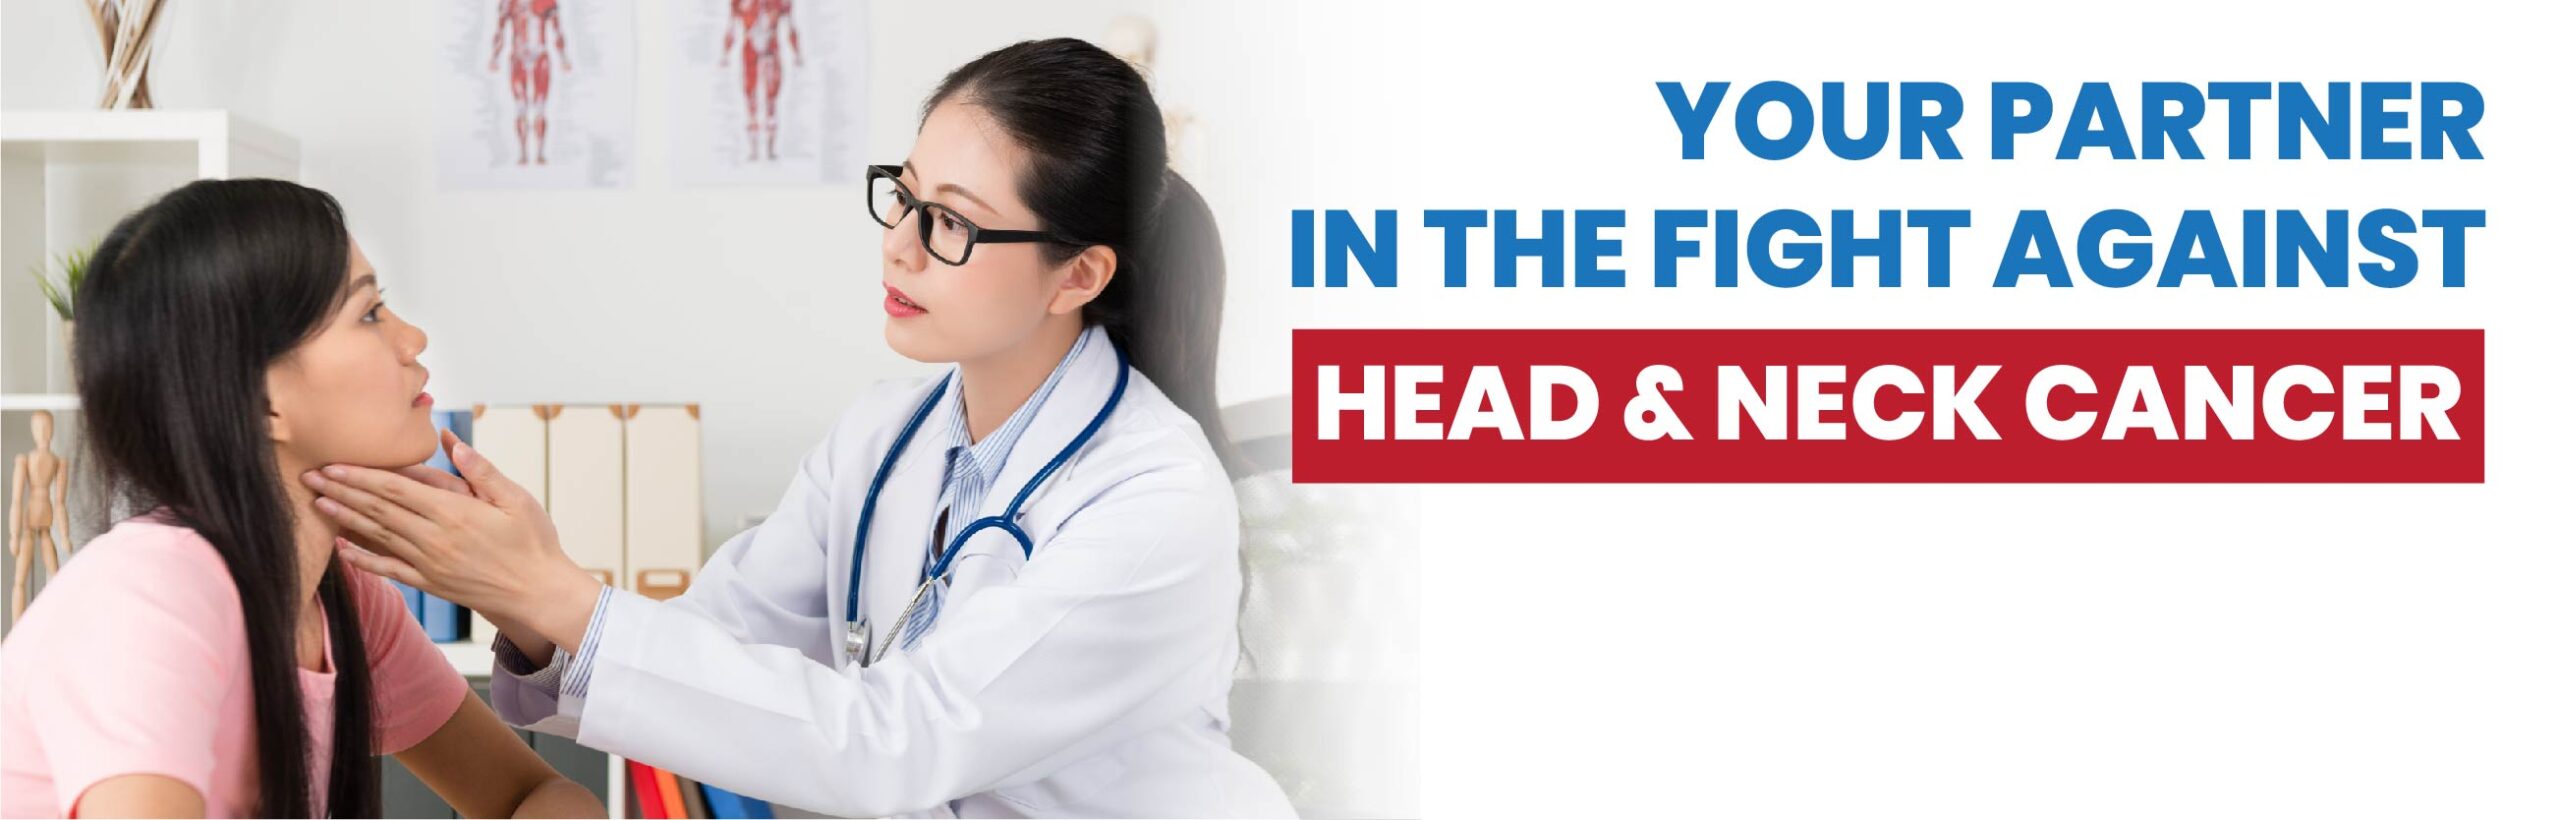 Your Partner In The Fight Against Head & Neck Cancer